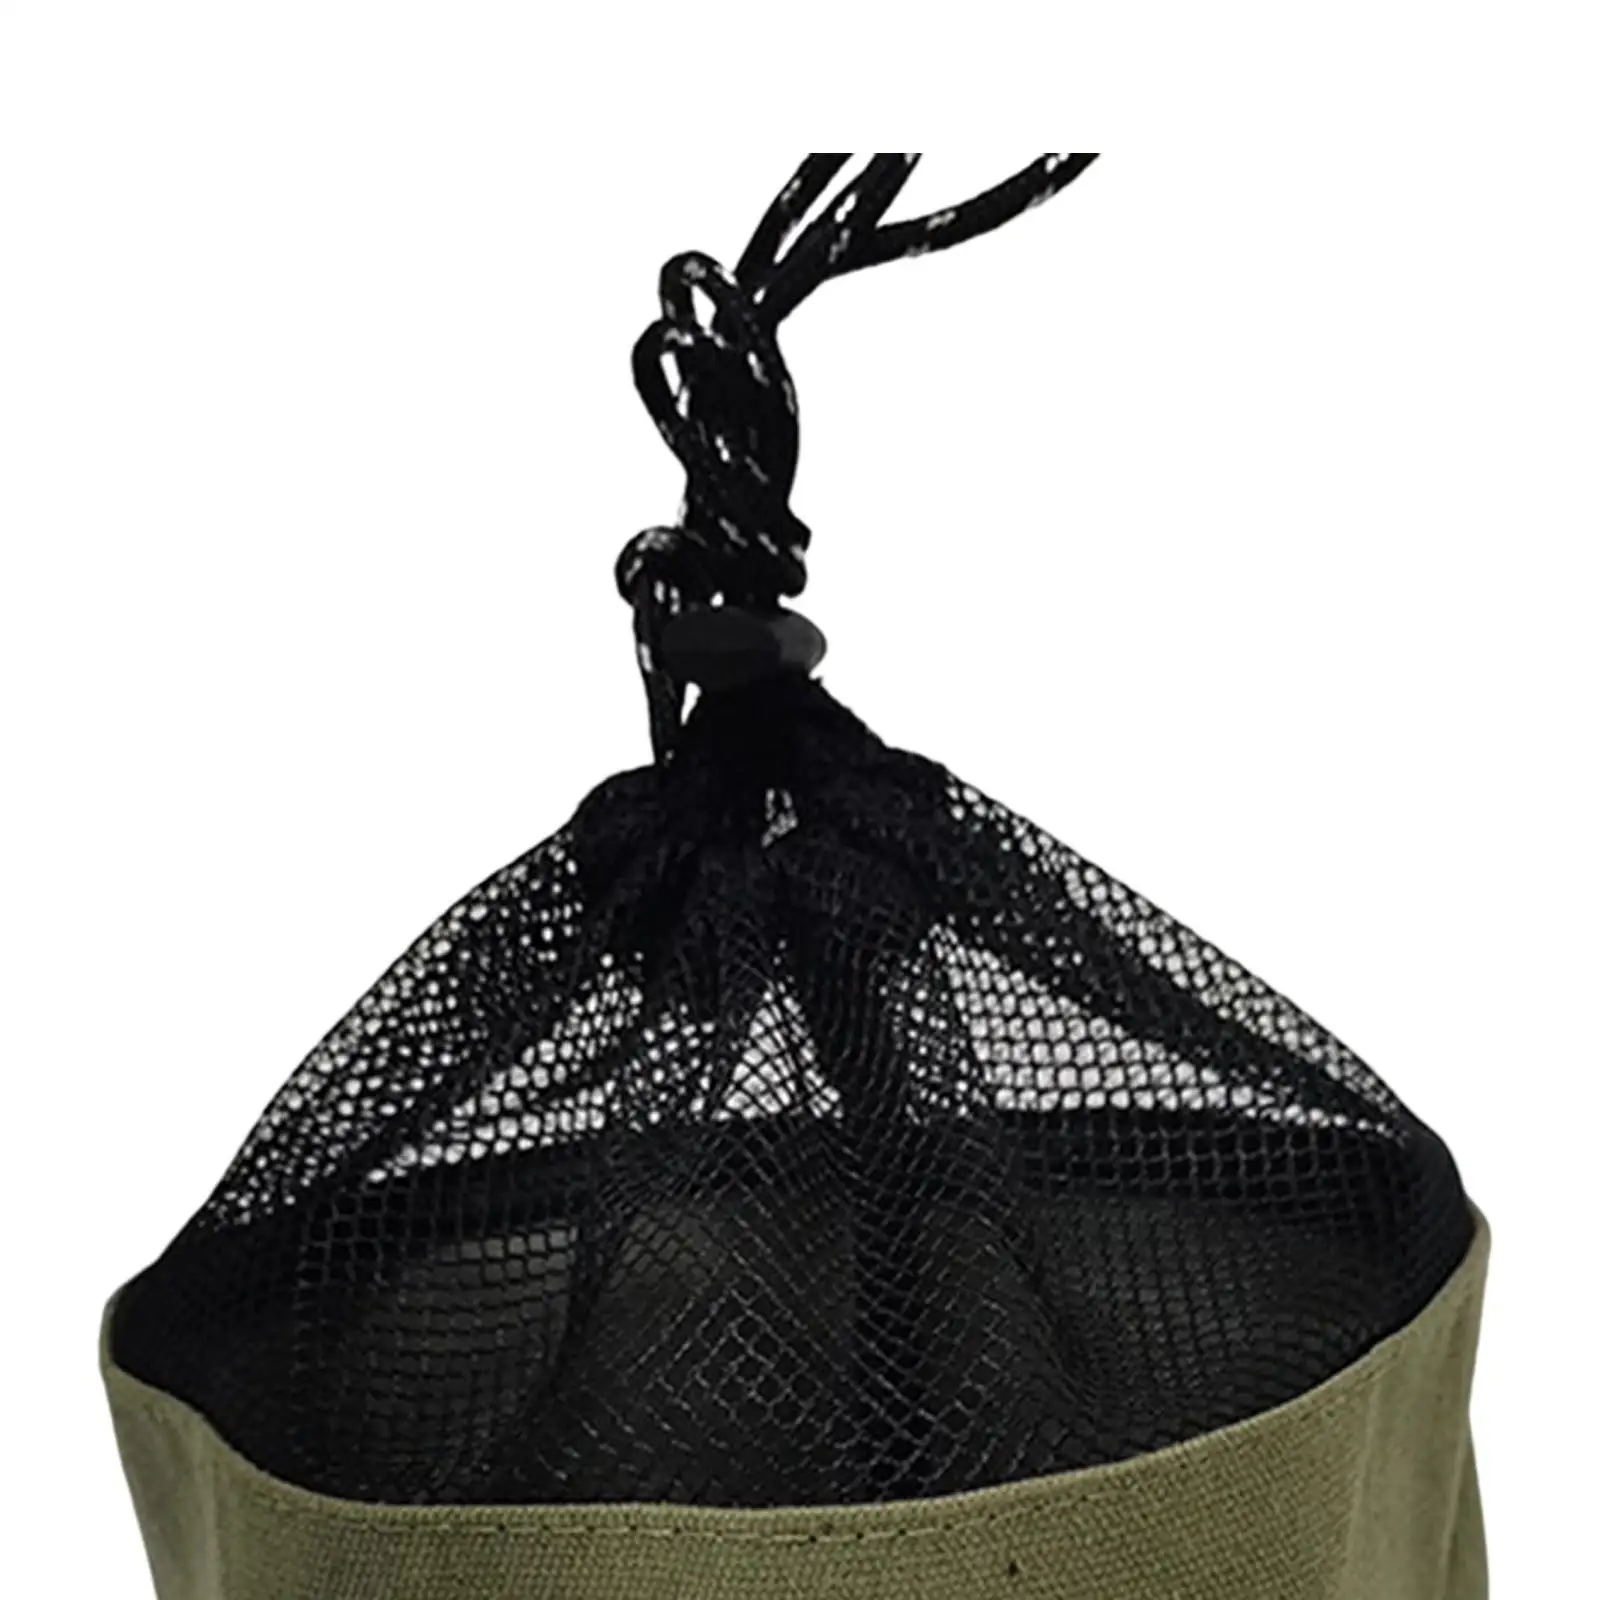 Portable Camping Cookware Storage Bag Drawstring Bag Tote Equipment Case Tableware Storage for Outdoor BBQ Dinner Cooking Hiking